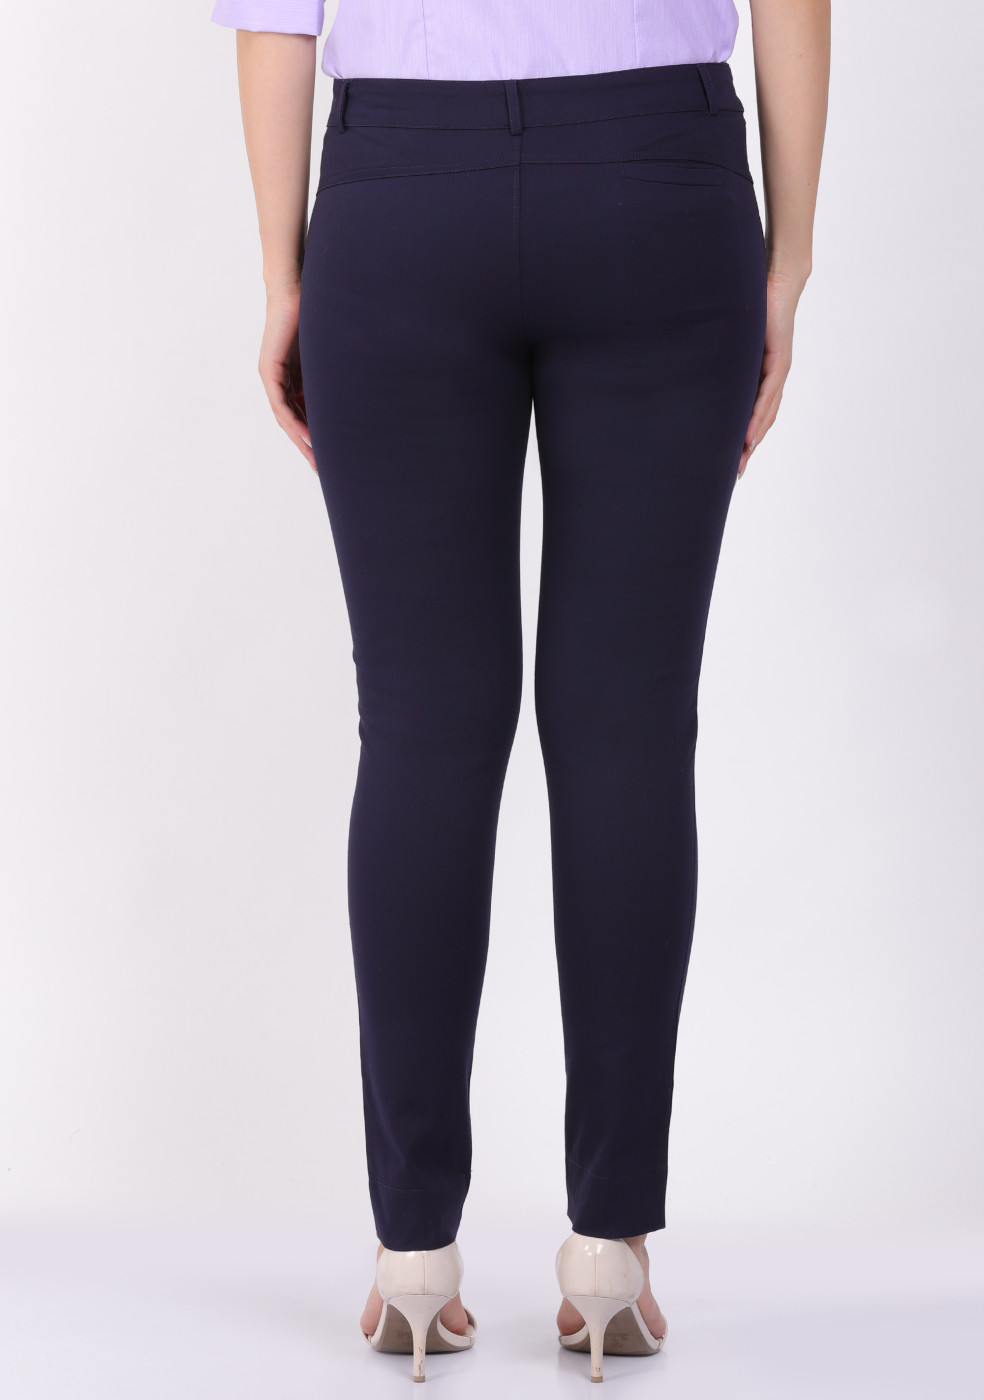 Zx3 Trouser Pant For Woman